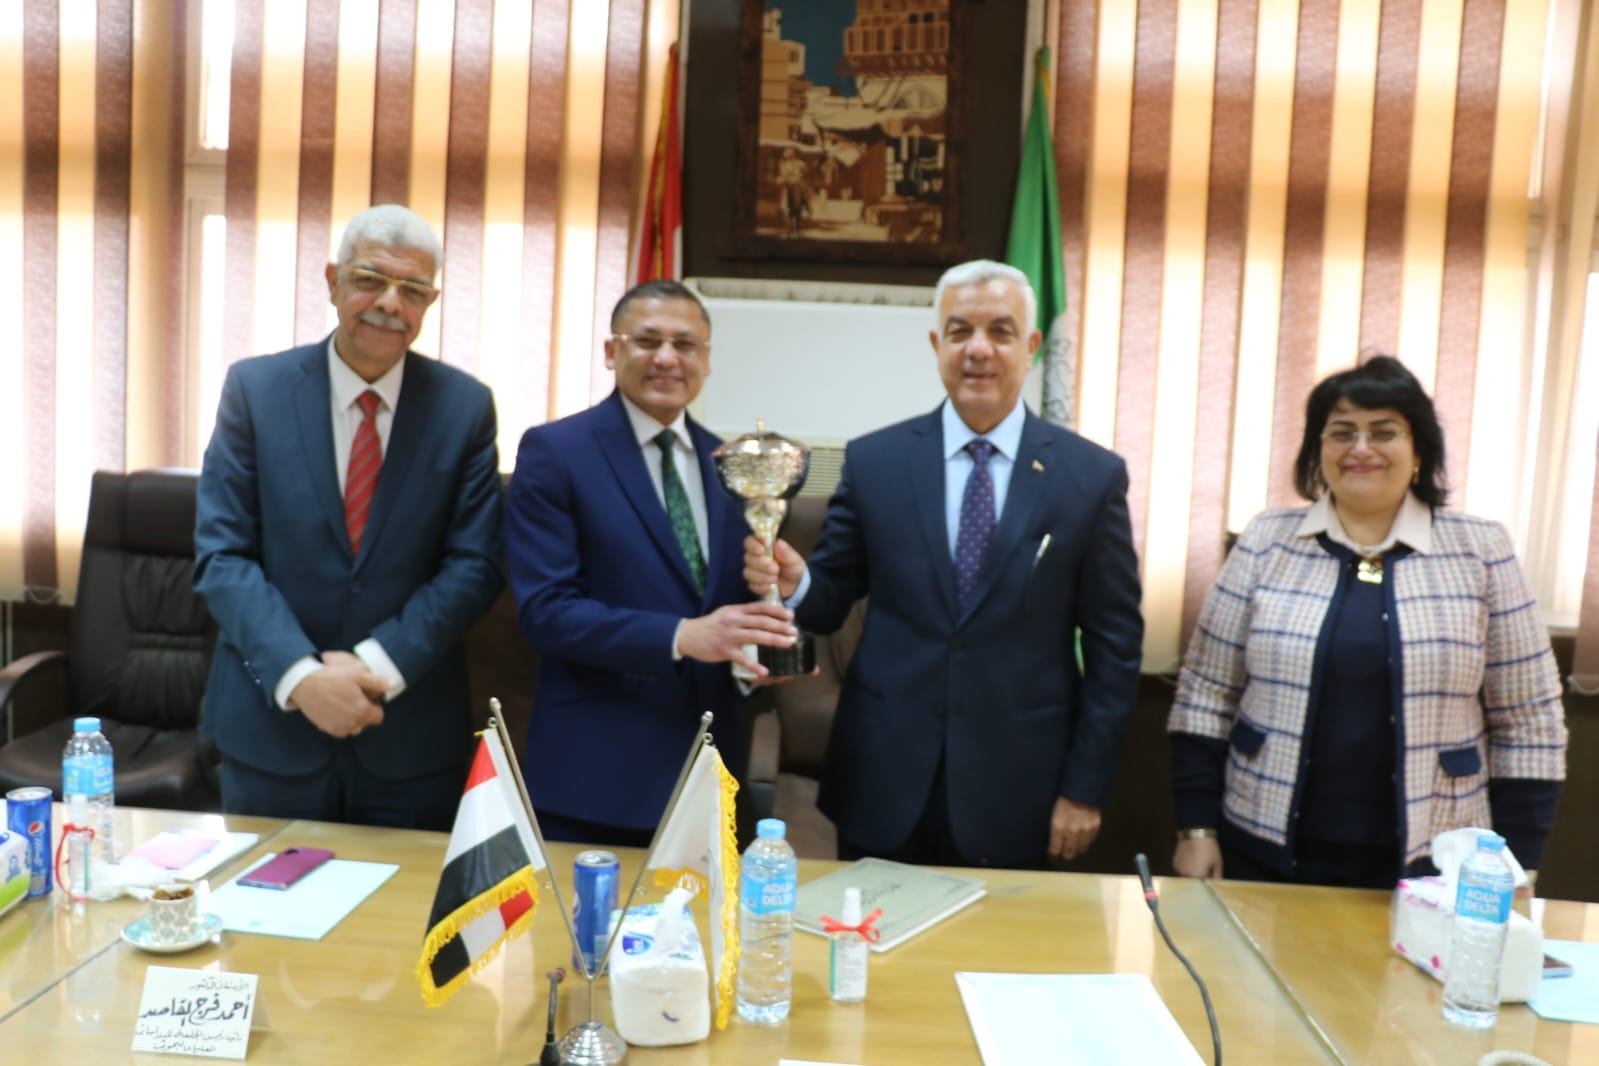 The President of Menoufia University honors the winning colleges with the Best Student Reception Awards and the Theater Festival